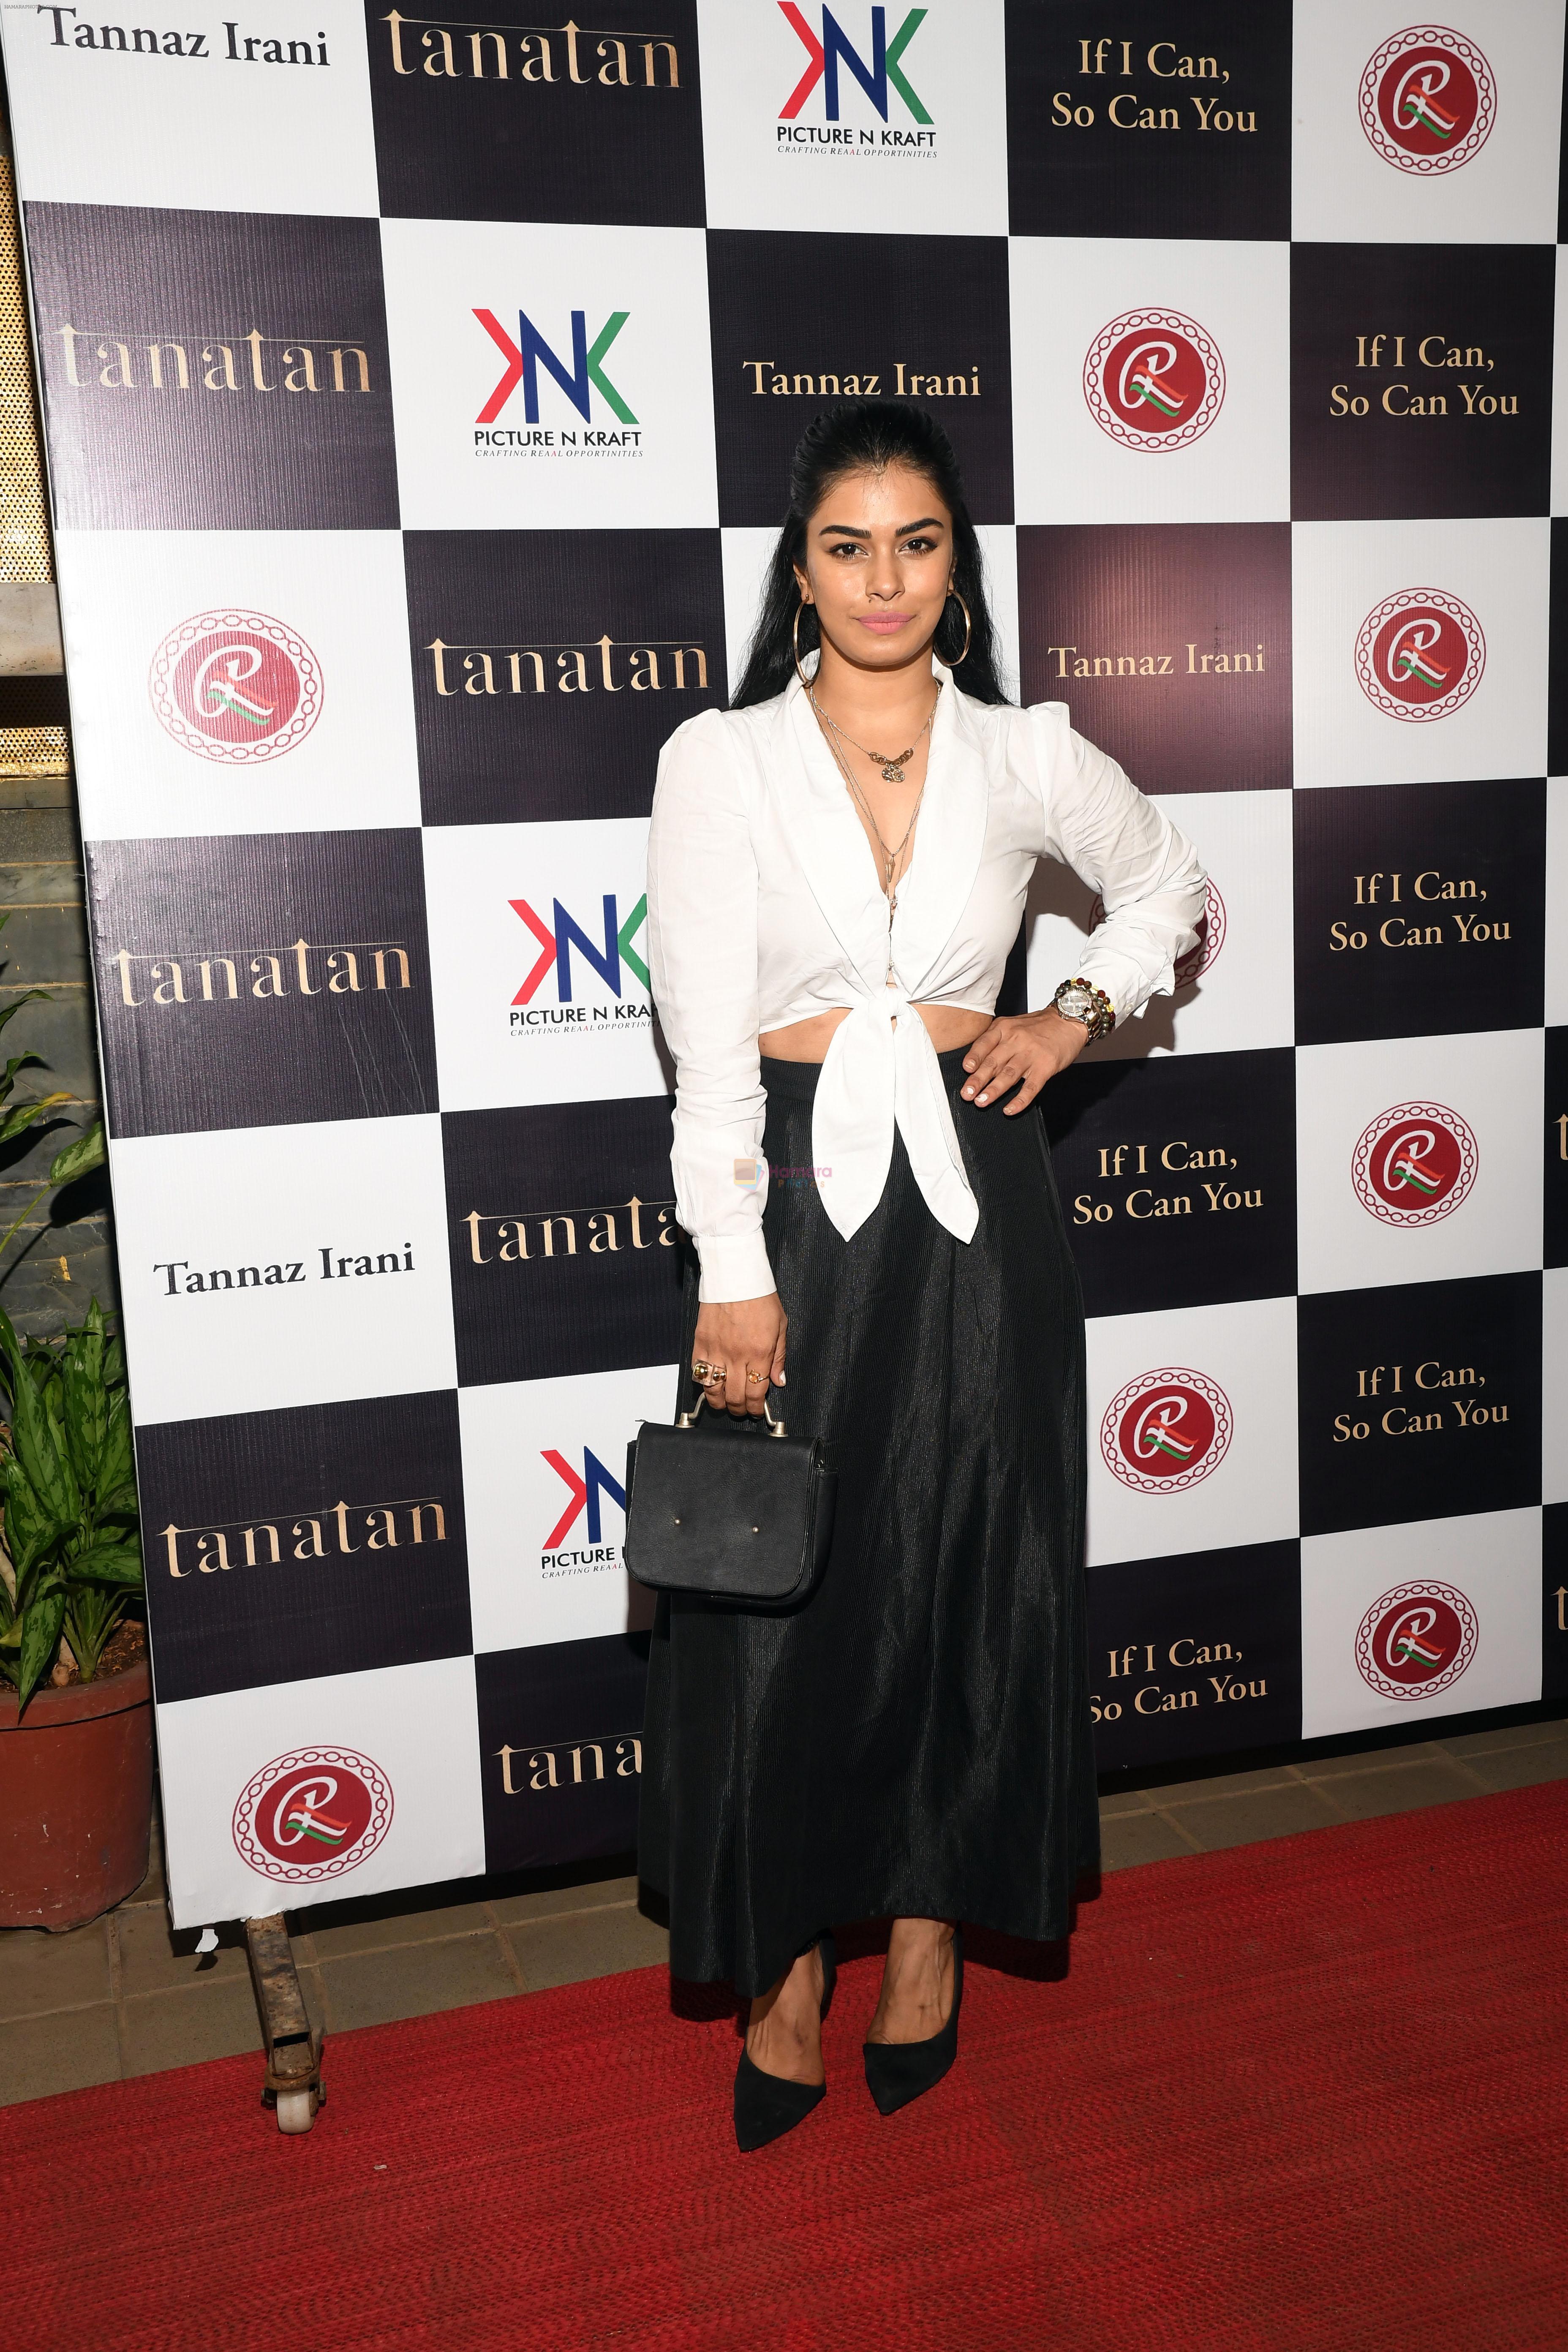 Ankita Maity at the launch of Tannaz Irani Book If I Can So Can You on 17th August 2023